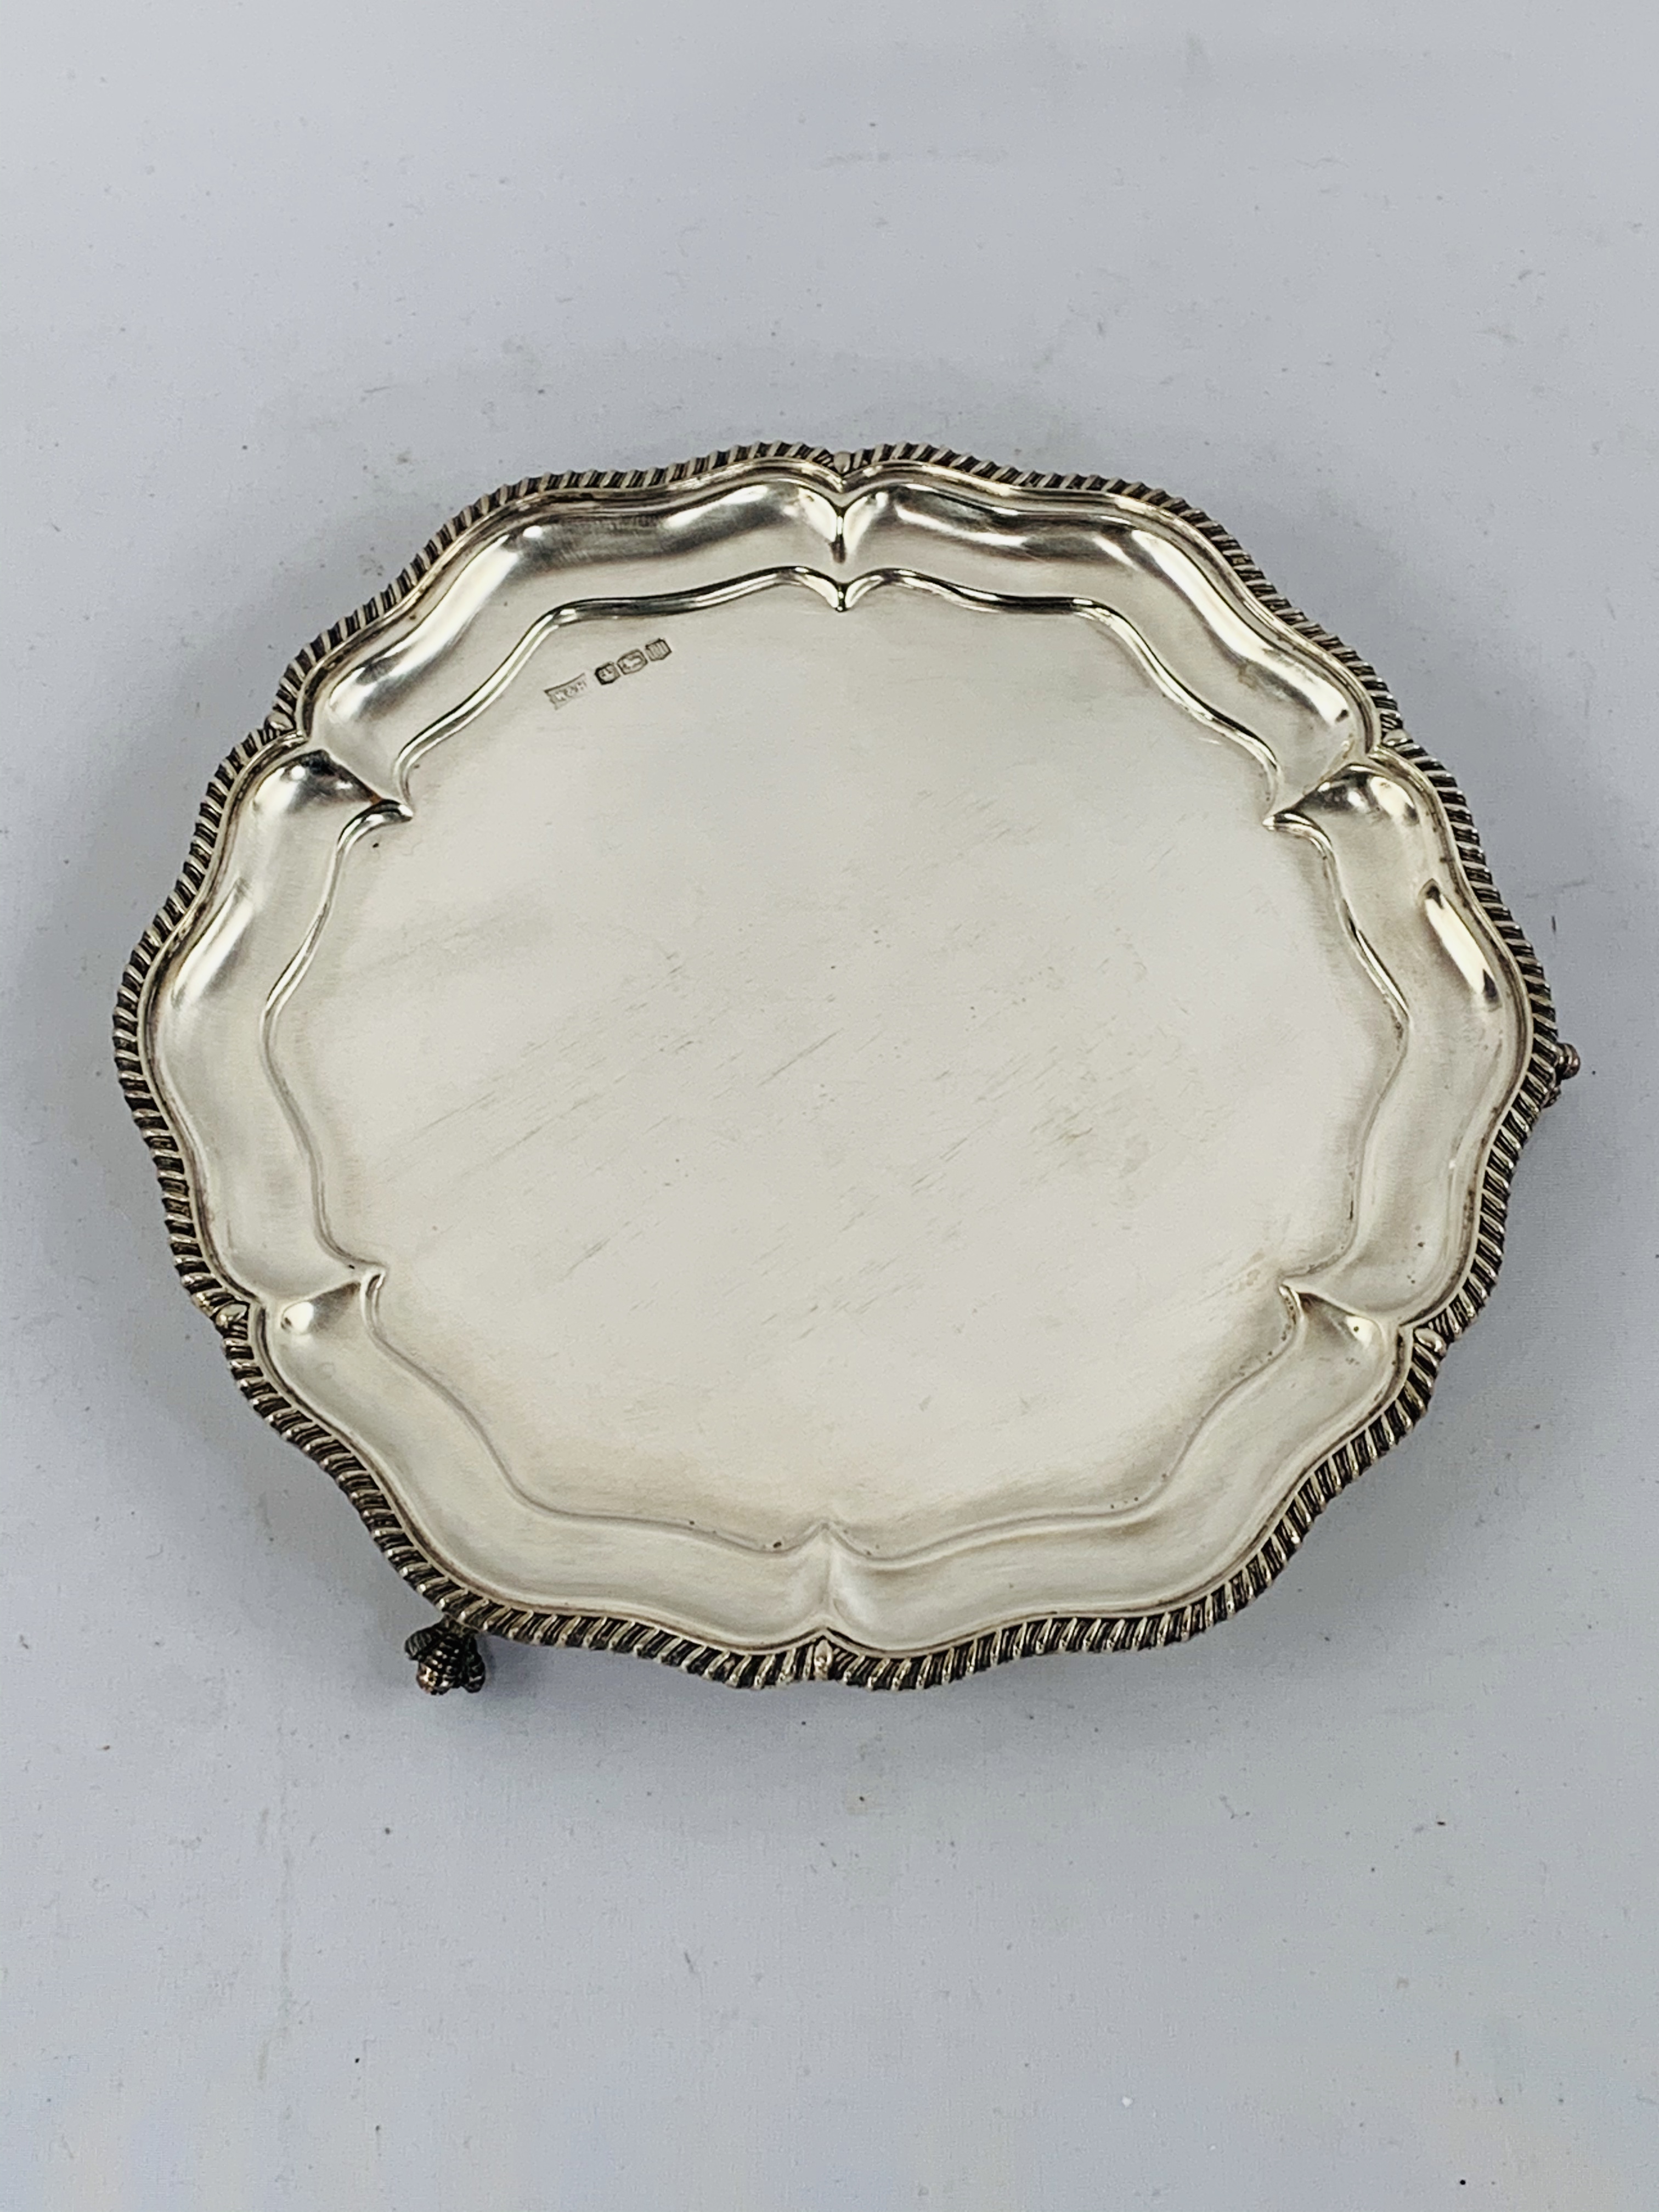 Walker and Hall sterling silver card tray, 1937 Chester hallmark. - Image 3 of 3